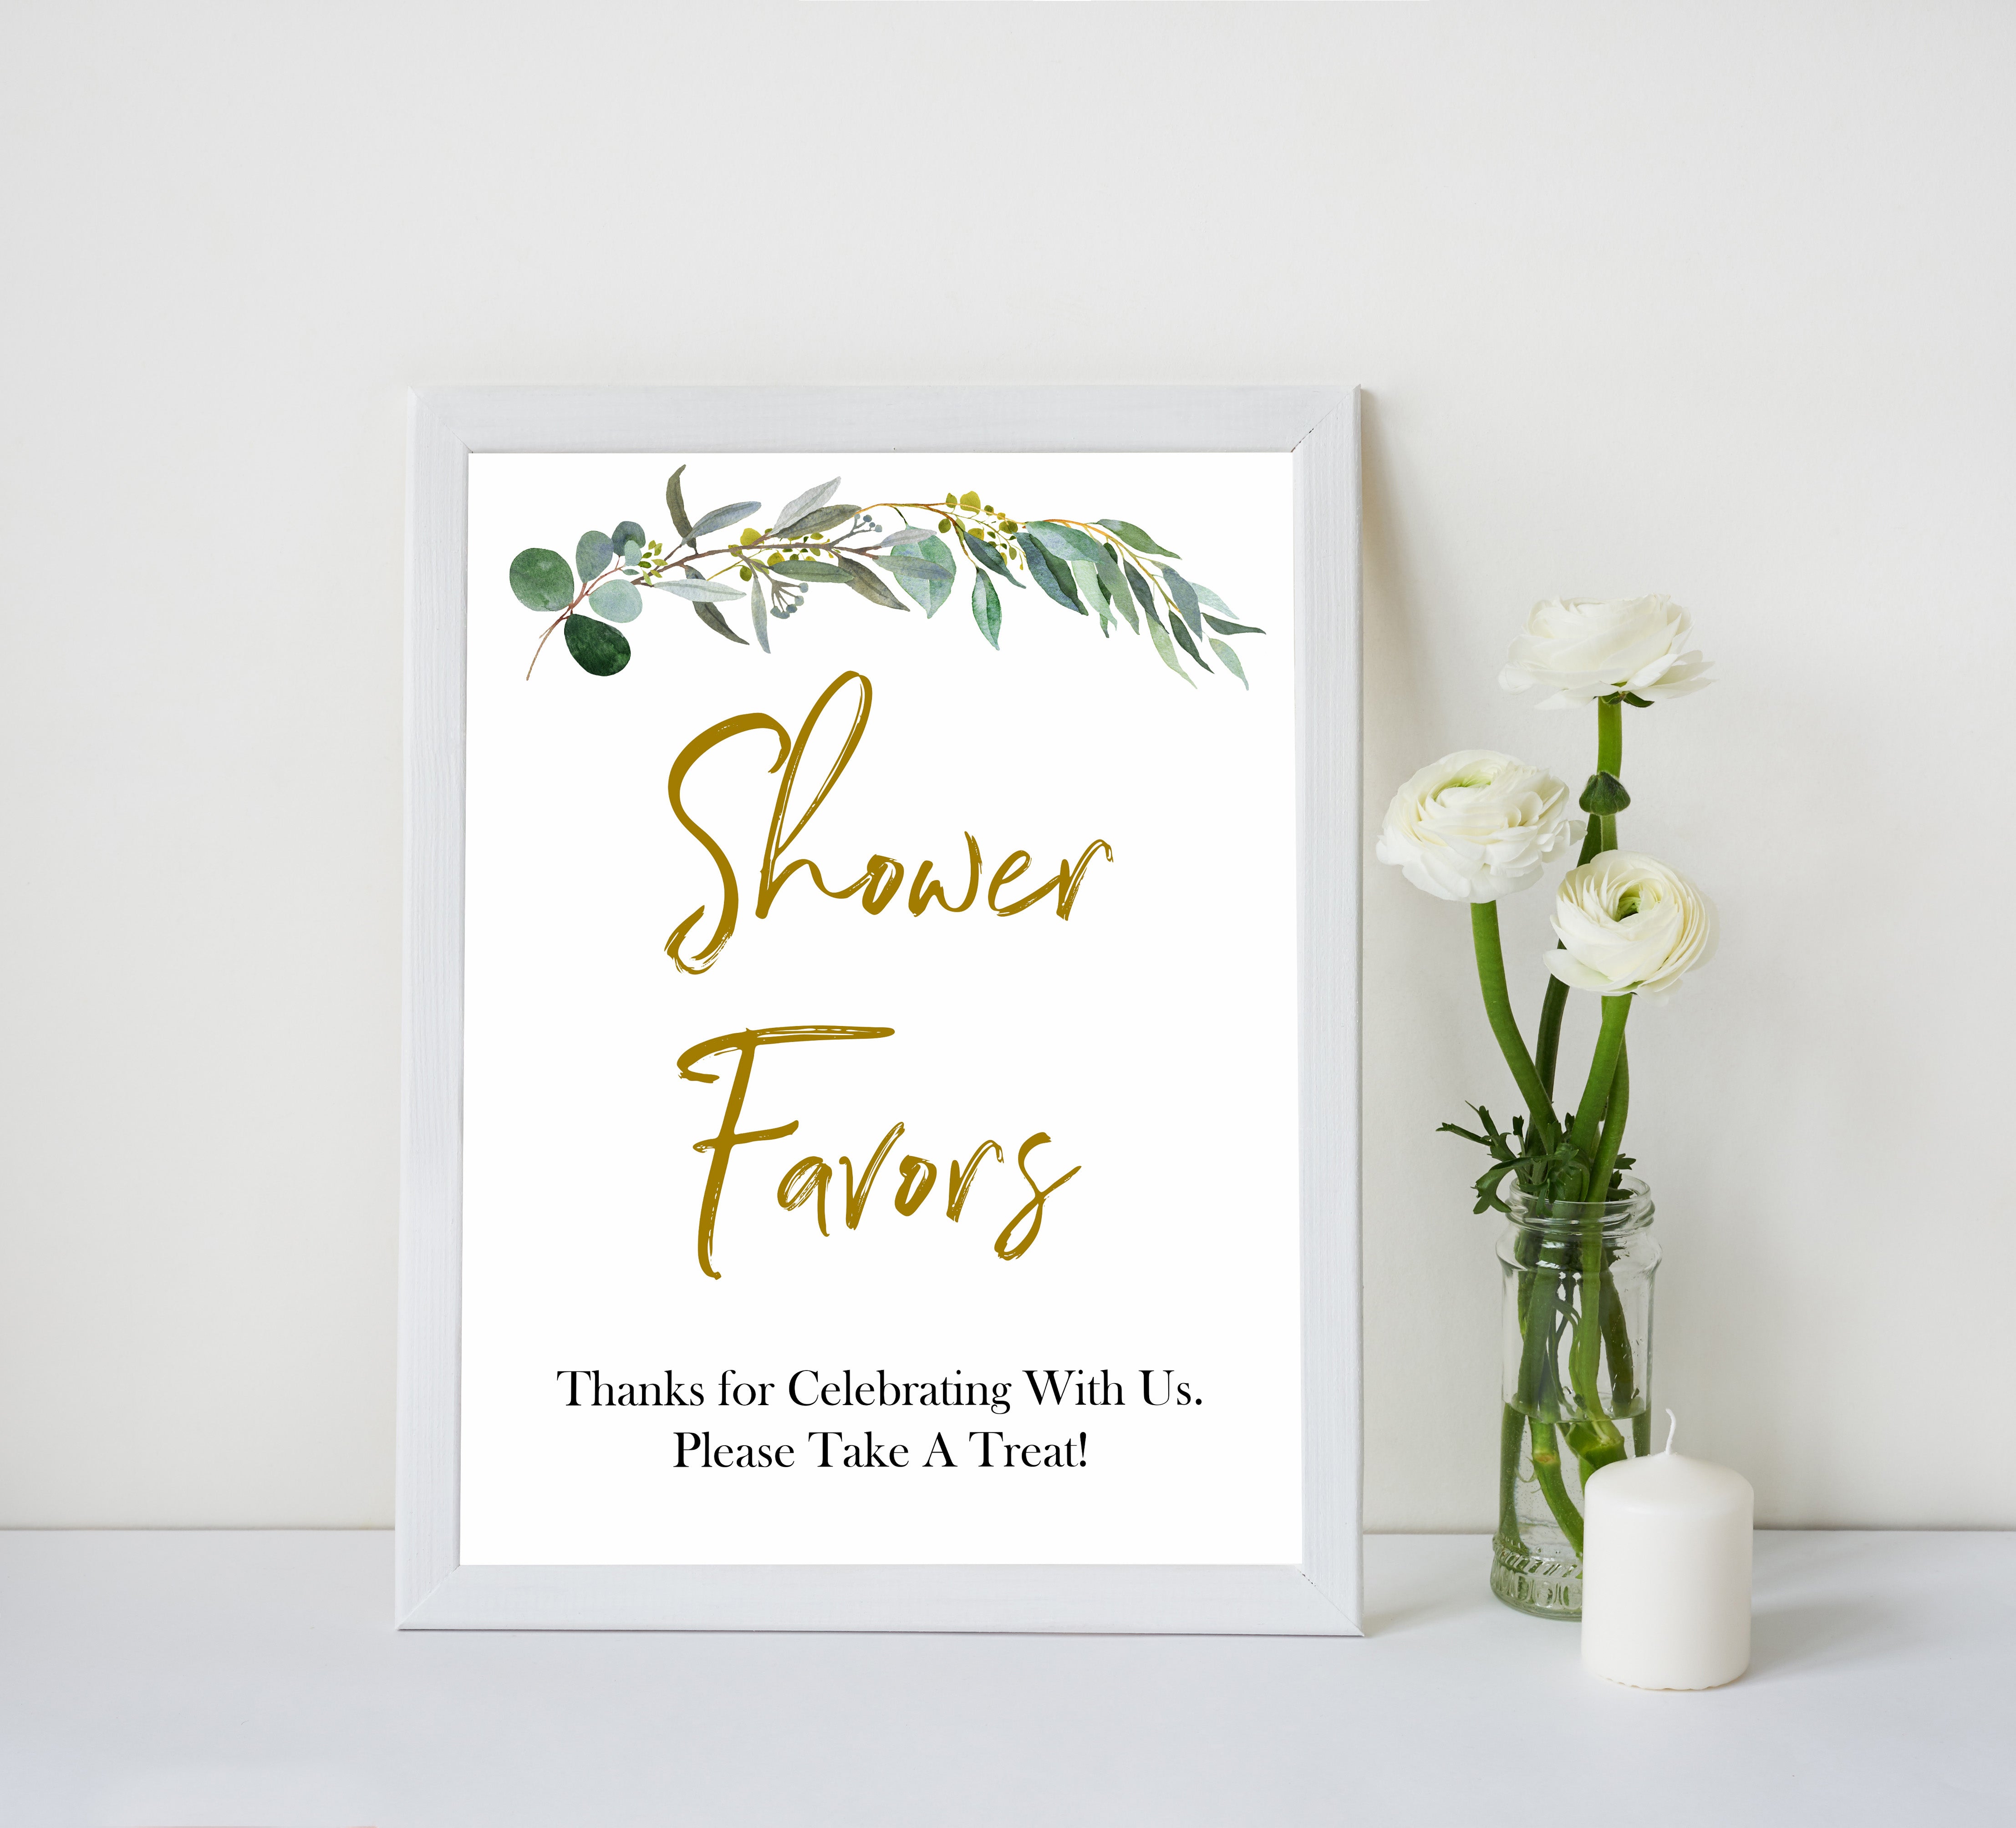 eucalyptus baby signs, shower favors baby signs, favour baby signs, printable baby signs, botanical baby signs, baby shower decor, fun baby signs